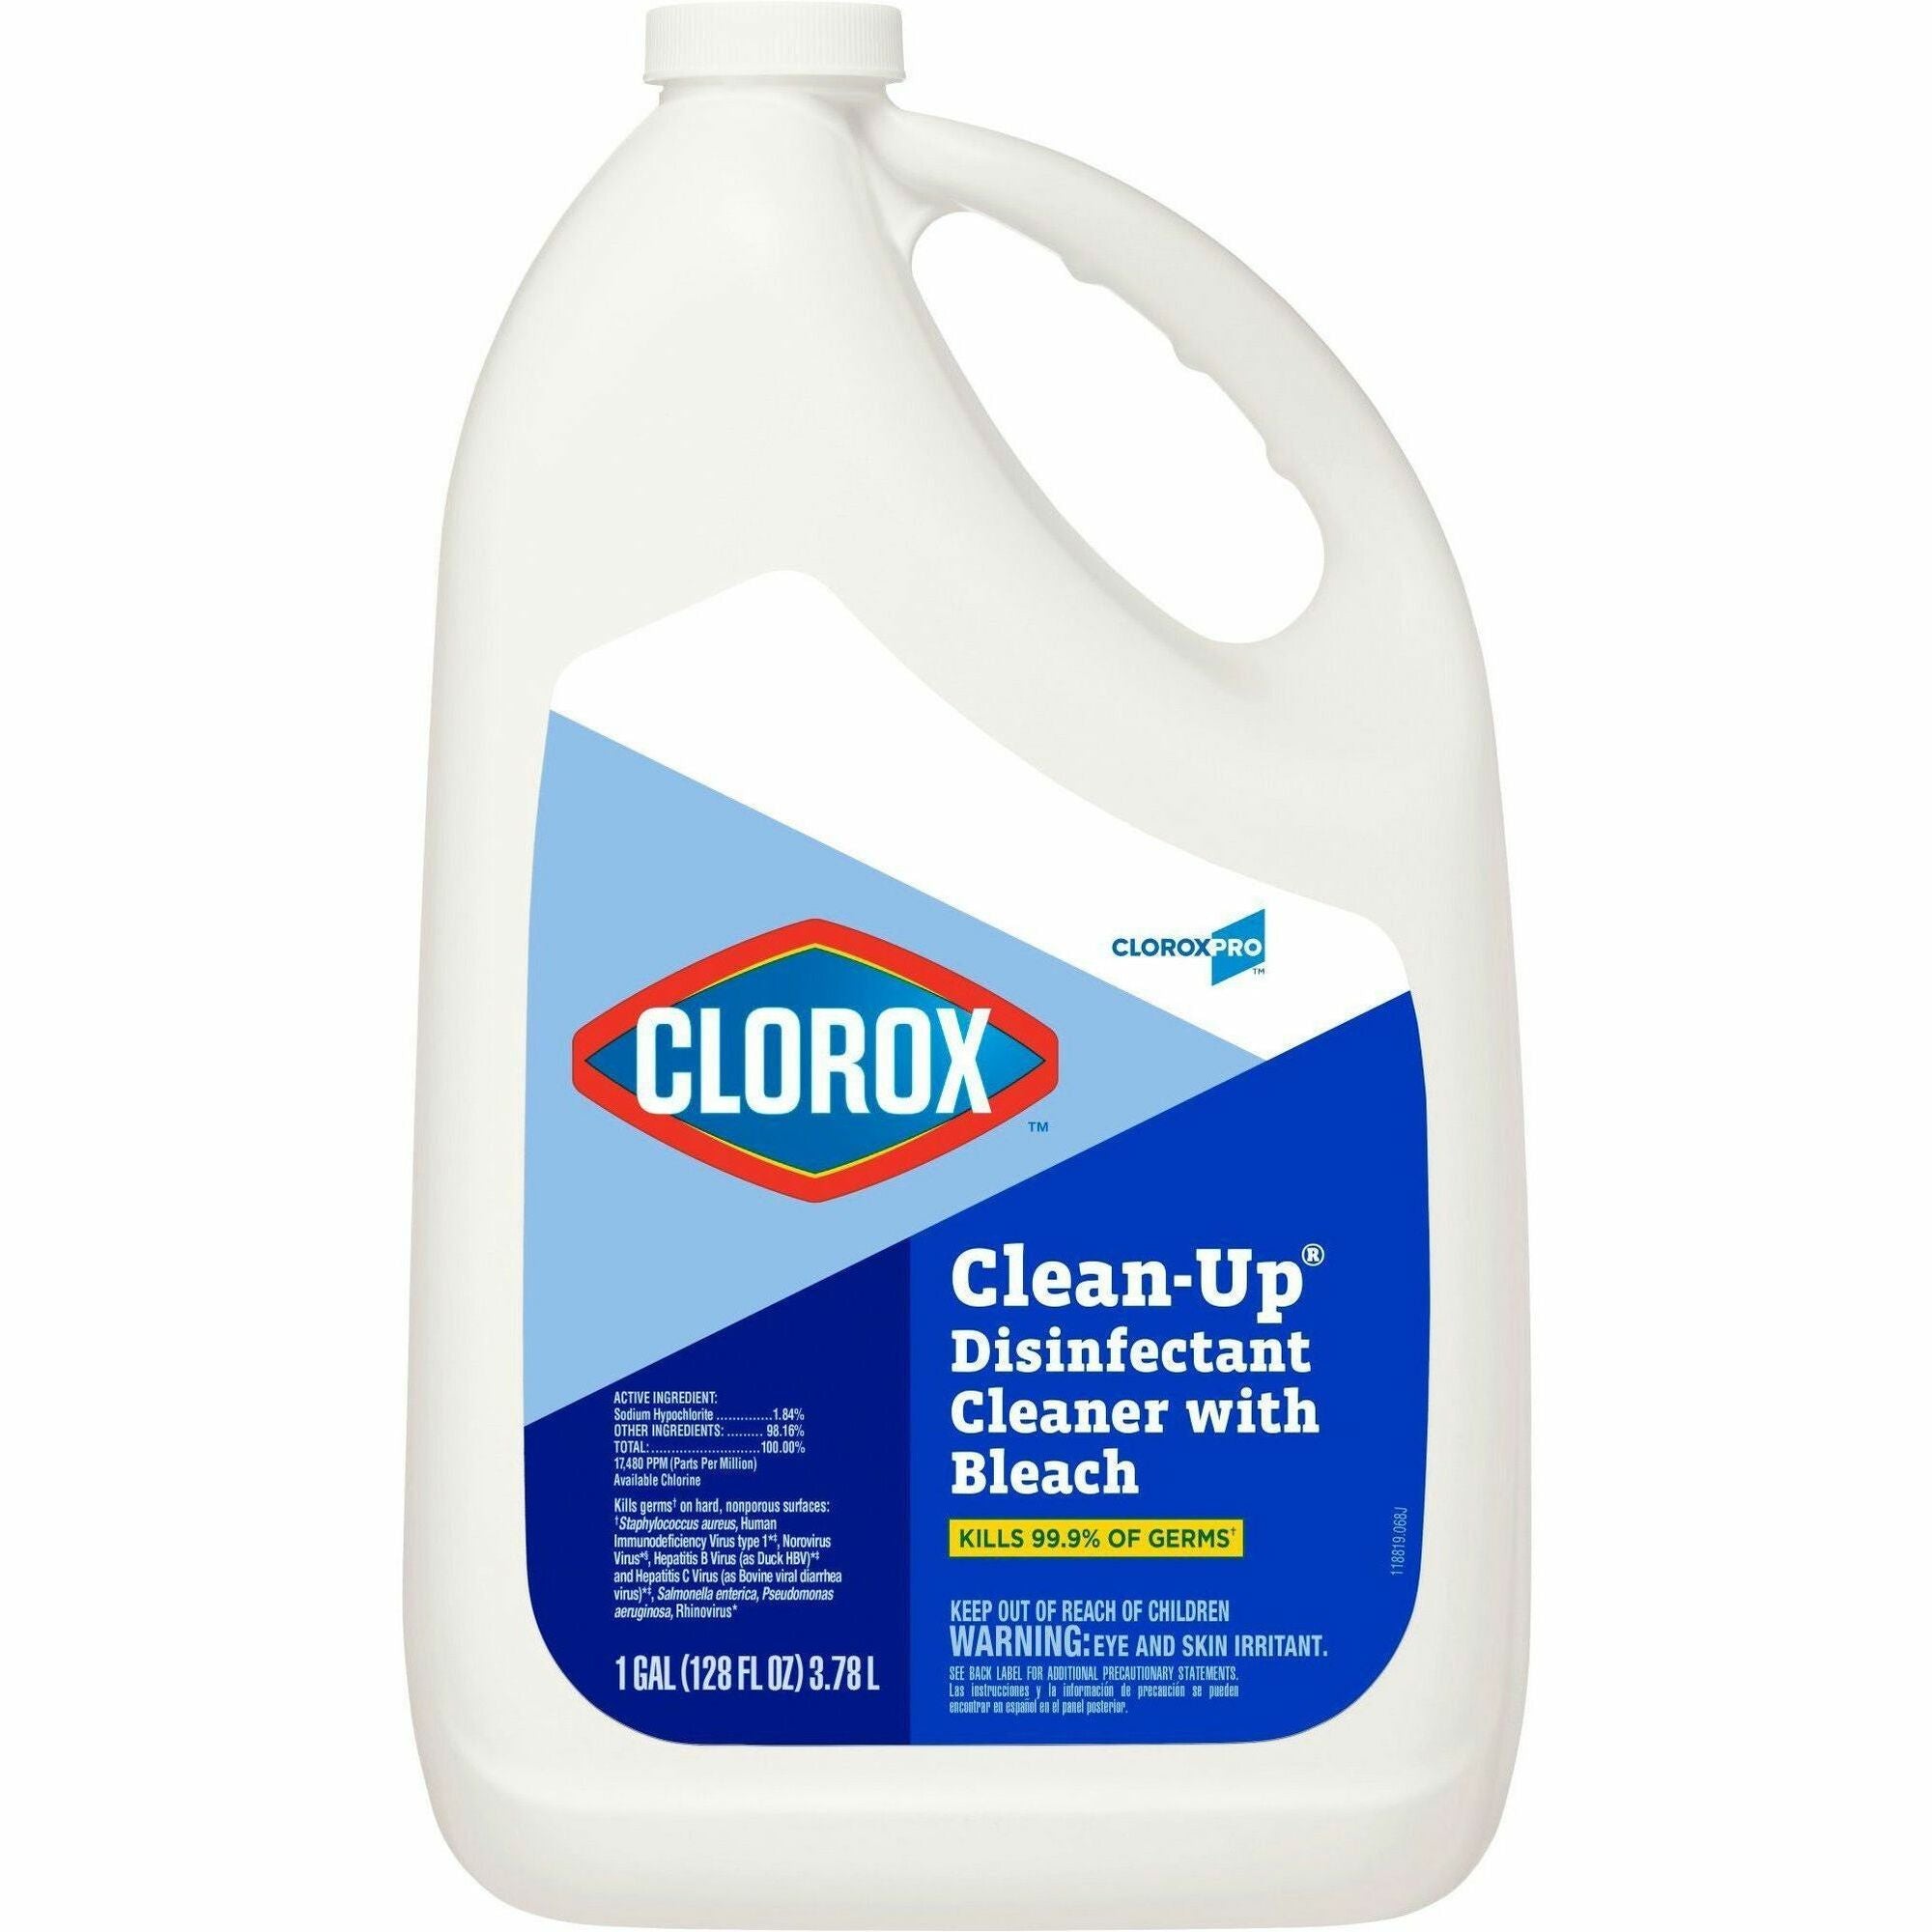 CloroxPro Clean-Up Disinfectant Cleaner with Bleach Refill - 128 fl oz (4 quart) - Fresh Scent - 108 / Pallet - Disinfectant, Antibacterial - Clear - 1